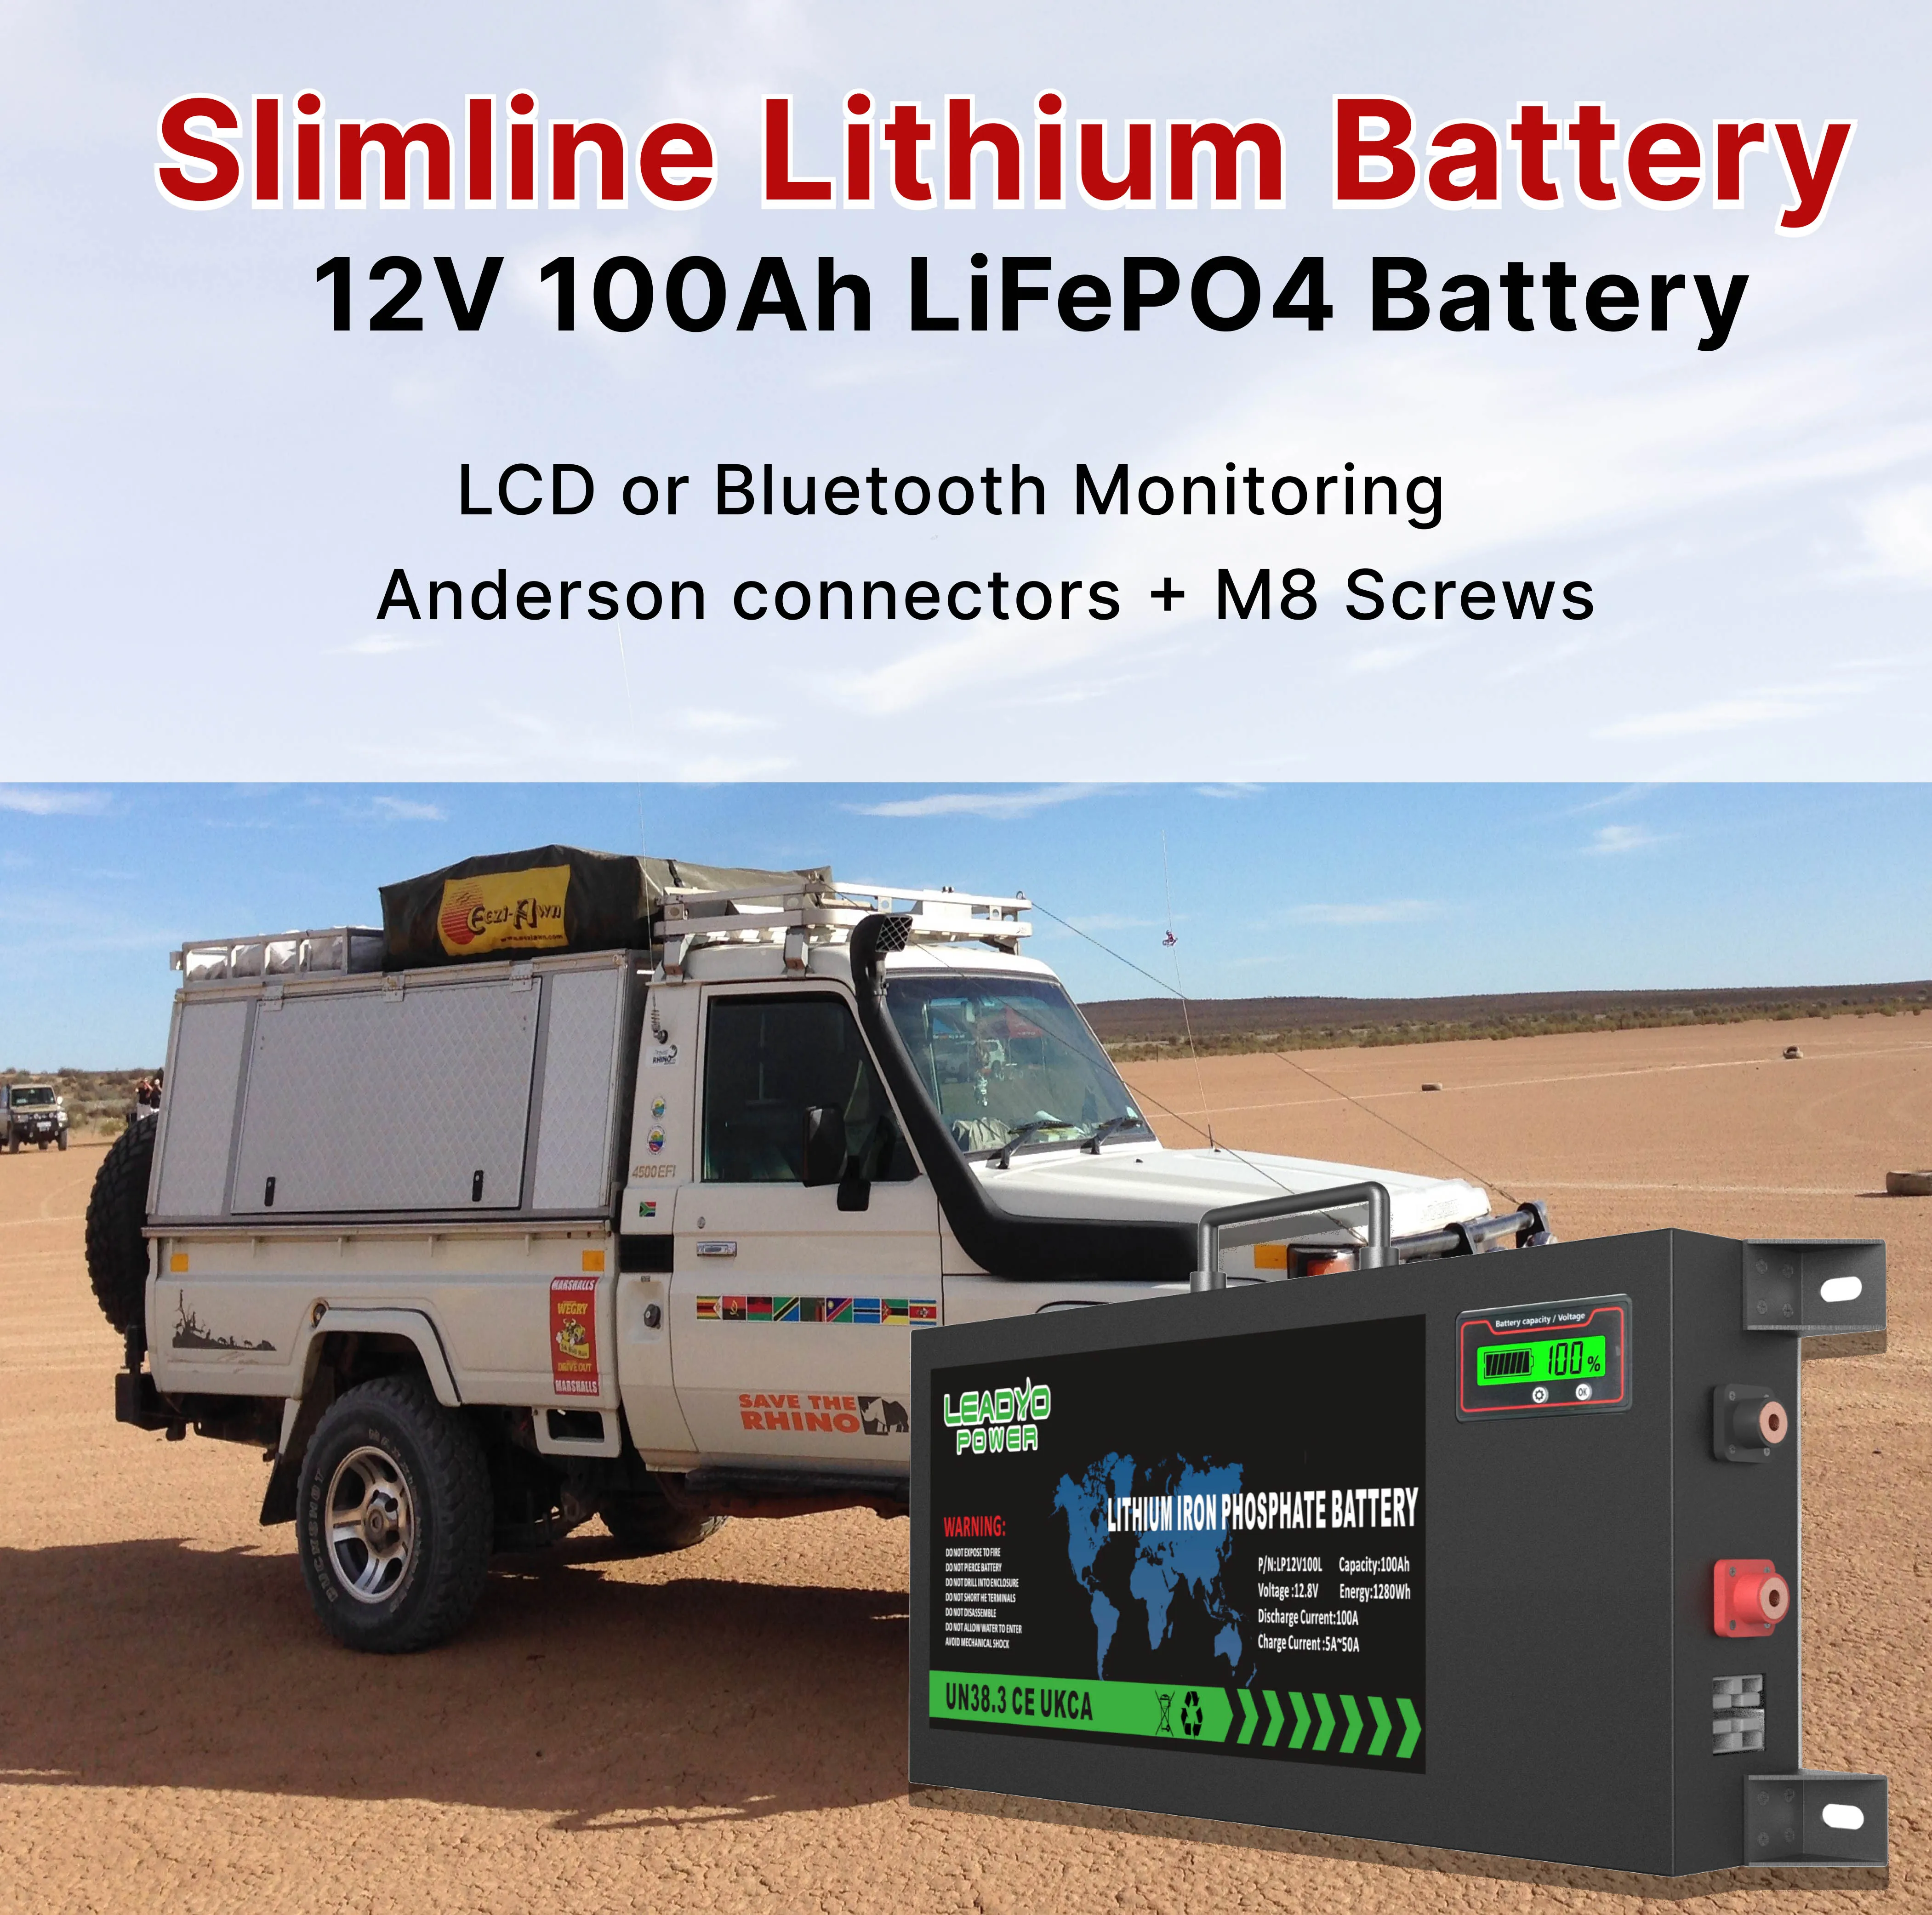 Ultra Slim 12V 100Ah 110Ah Lithium Batteries Slimline LiFePO4 Battery for 4x4 4WD Off-road Outdoor Camping details